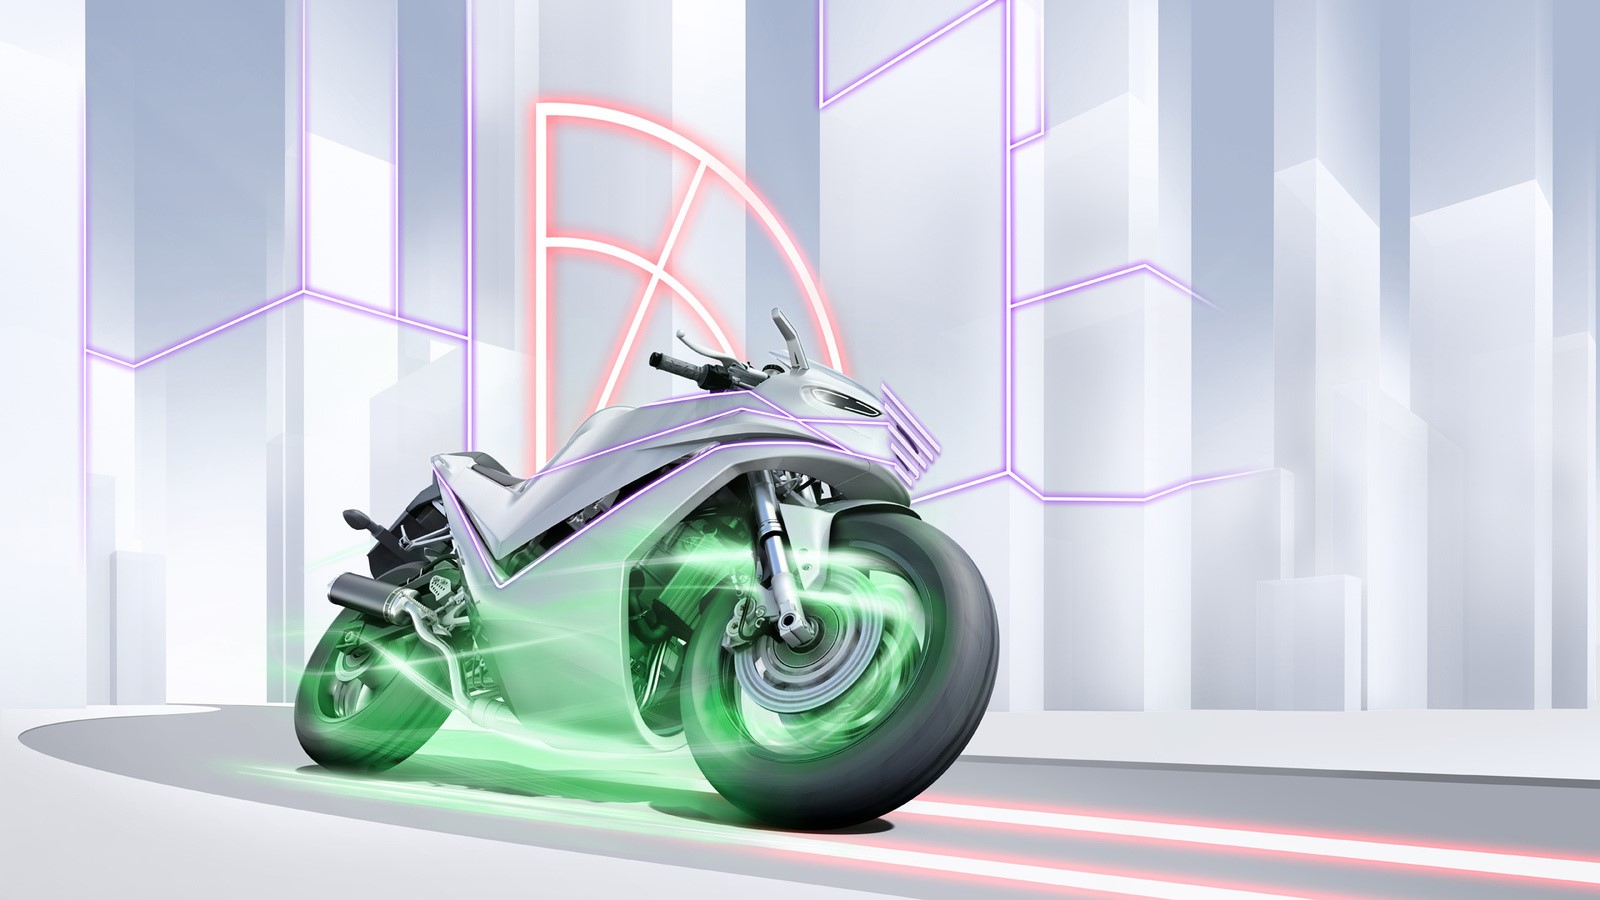 Greater safety on two wheels: Bosch innovations for the motorcycles of the future